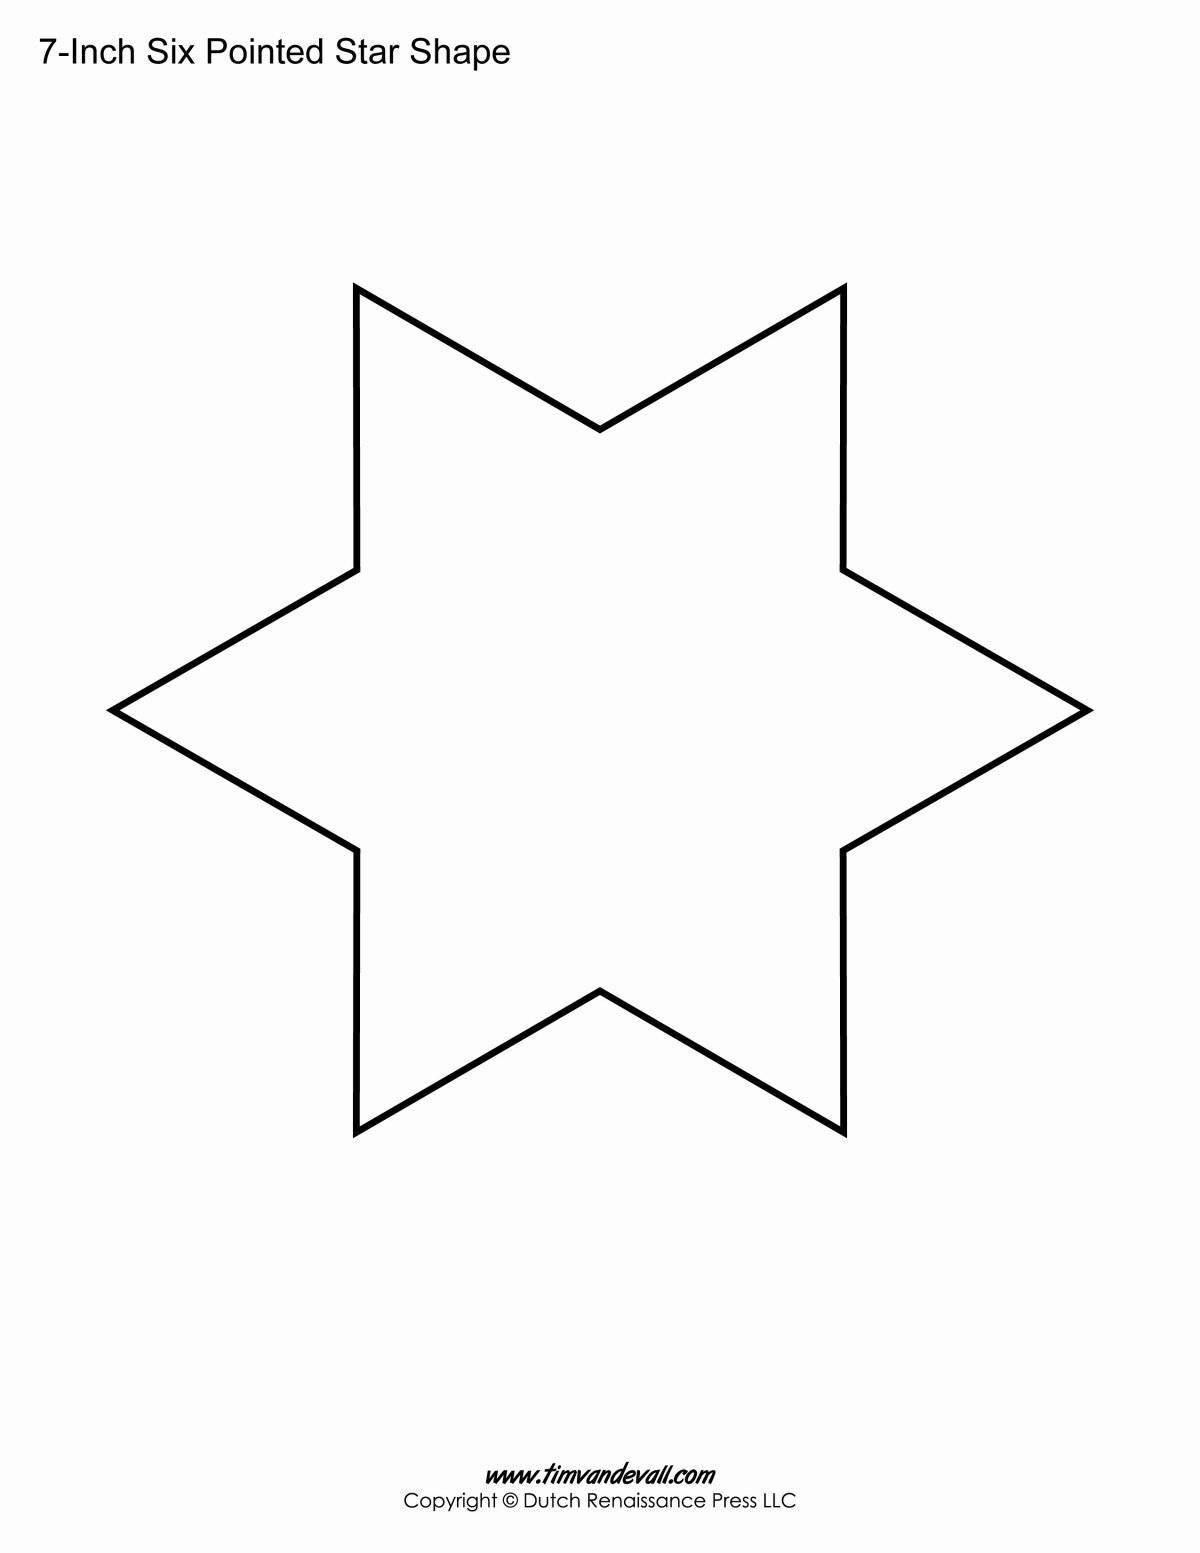 Fun coloring page with six pointed star